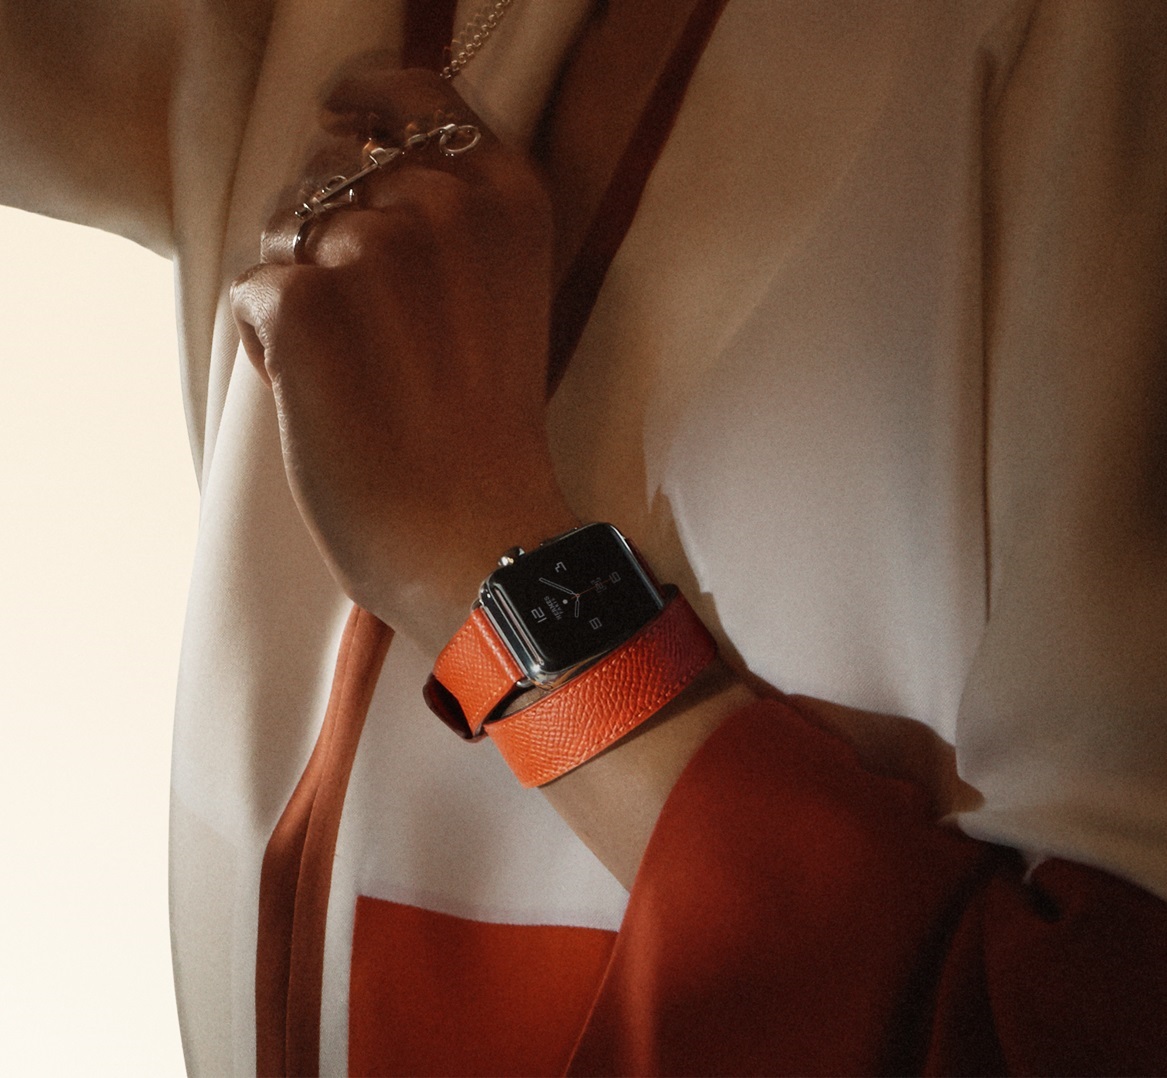 Apple will sell Apple Watch Hermès bands separately